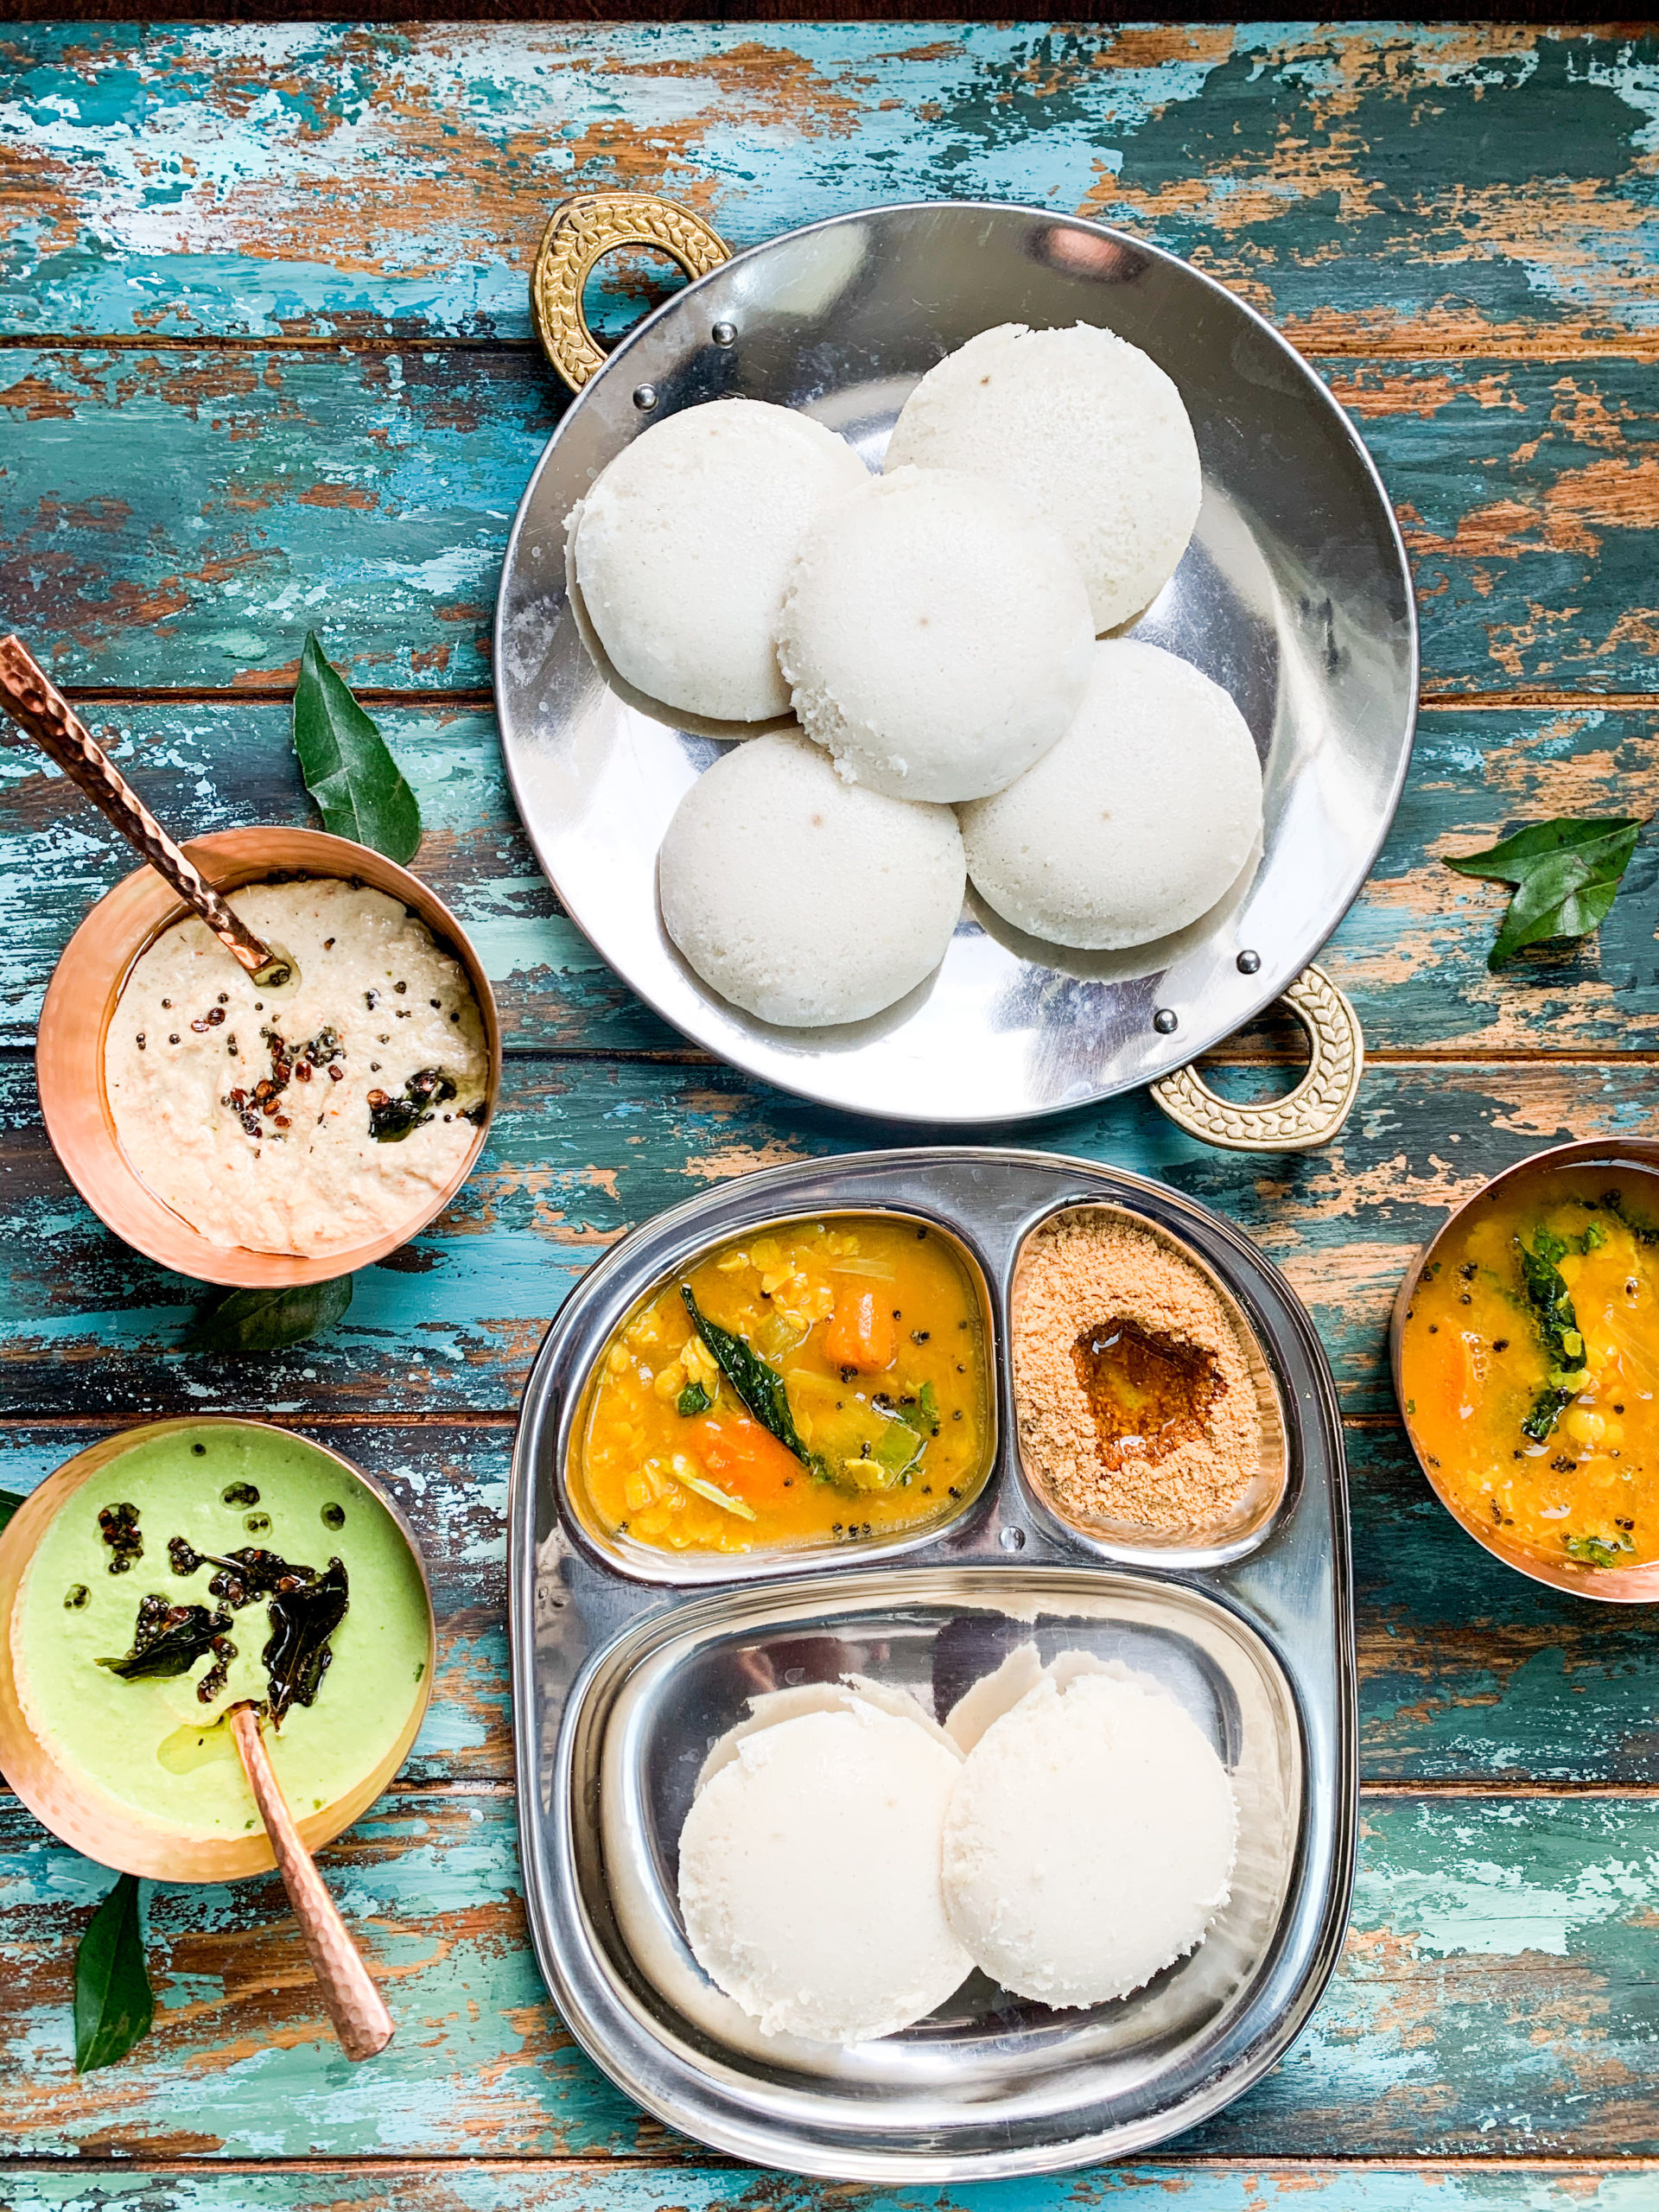 A spread of South Indian style breakfast